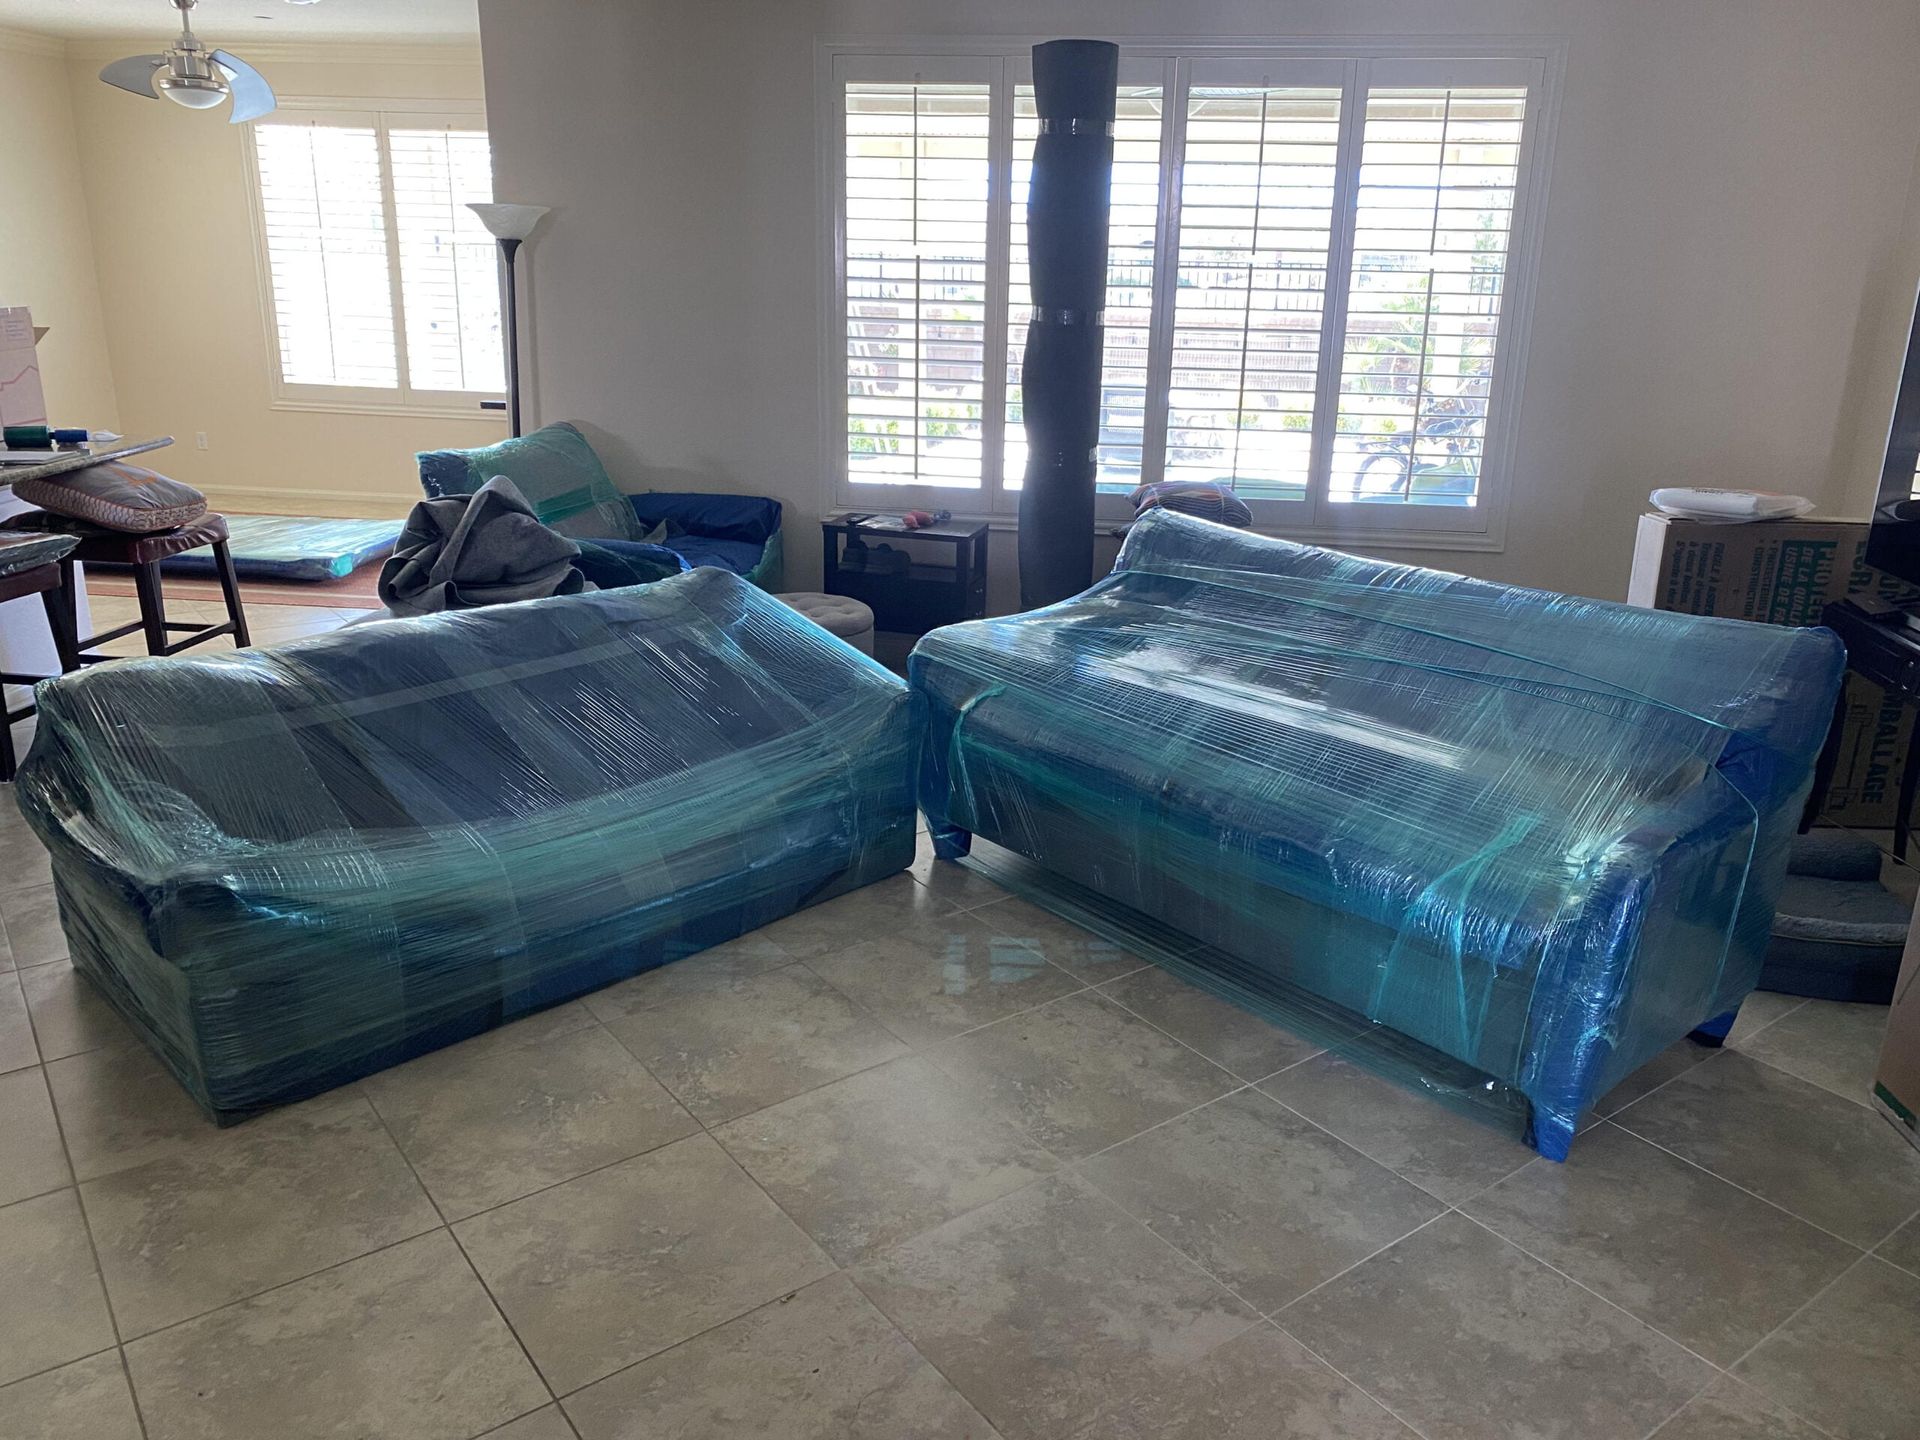 A living room with two couches wrapped in plastic.